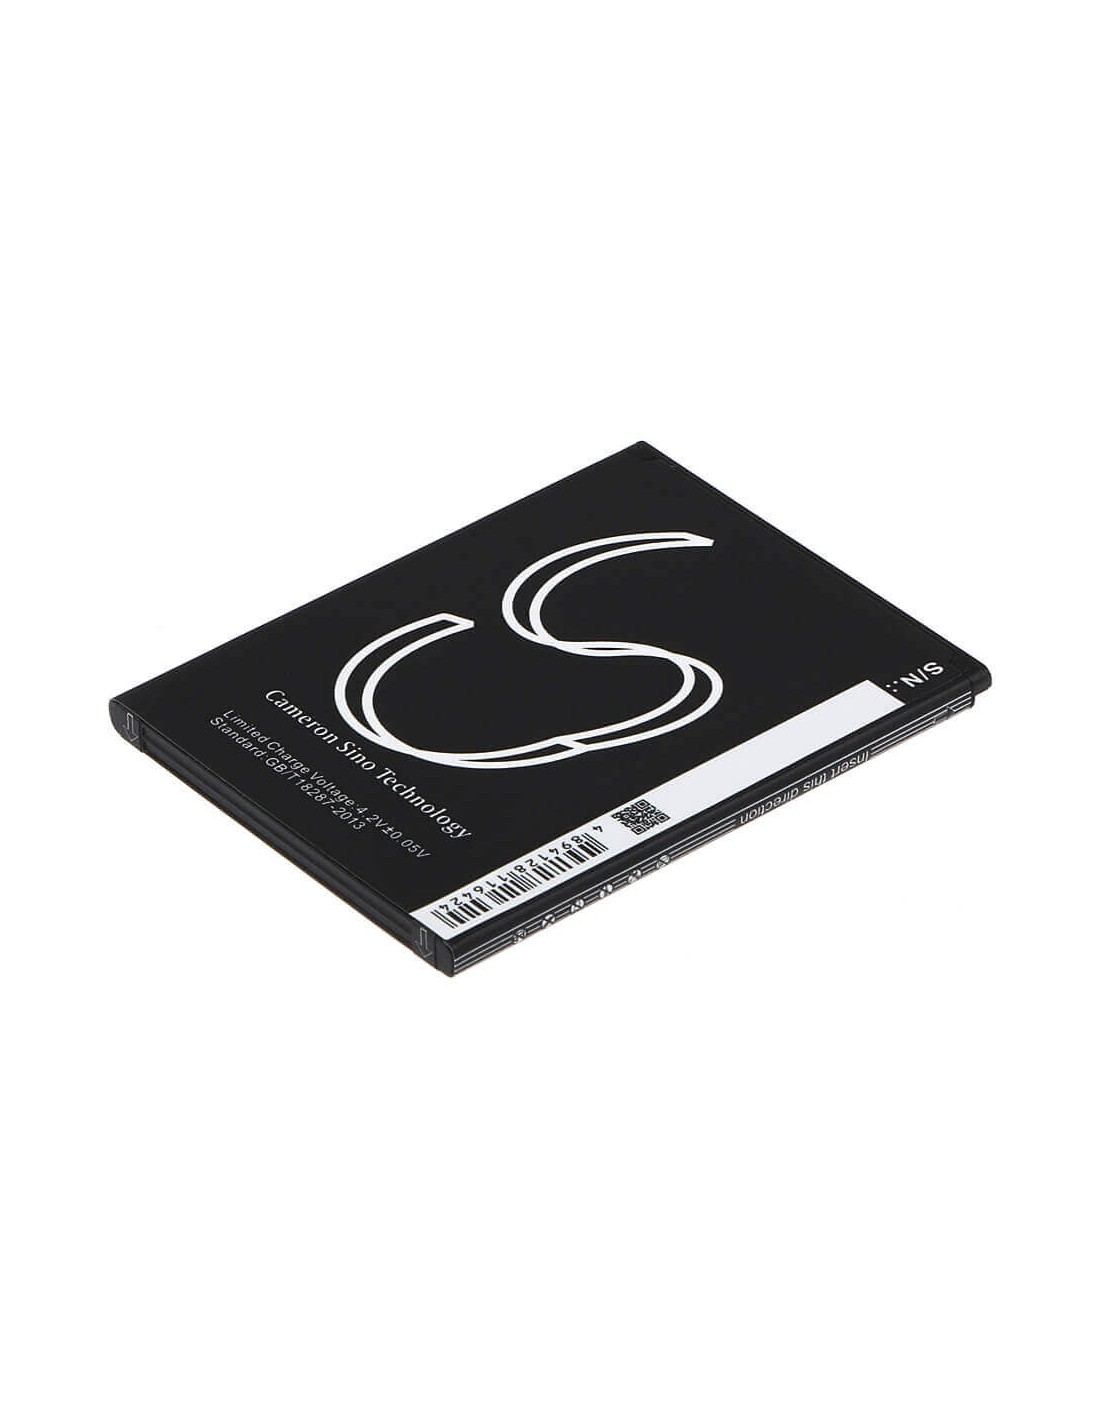 Battery for K-Touch S5, S5T, T810 3.7V, 1800mAh - 6.66Wh